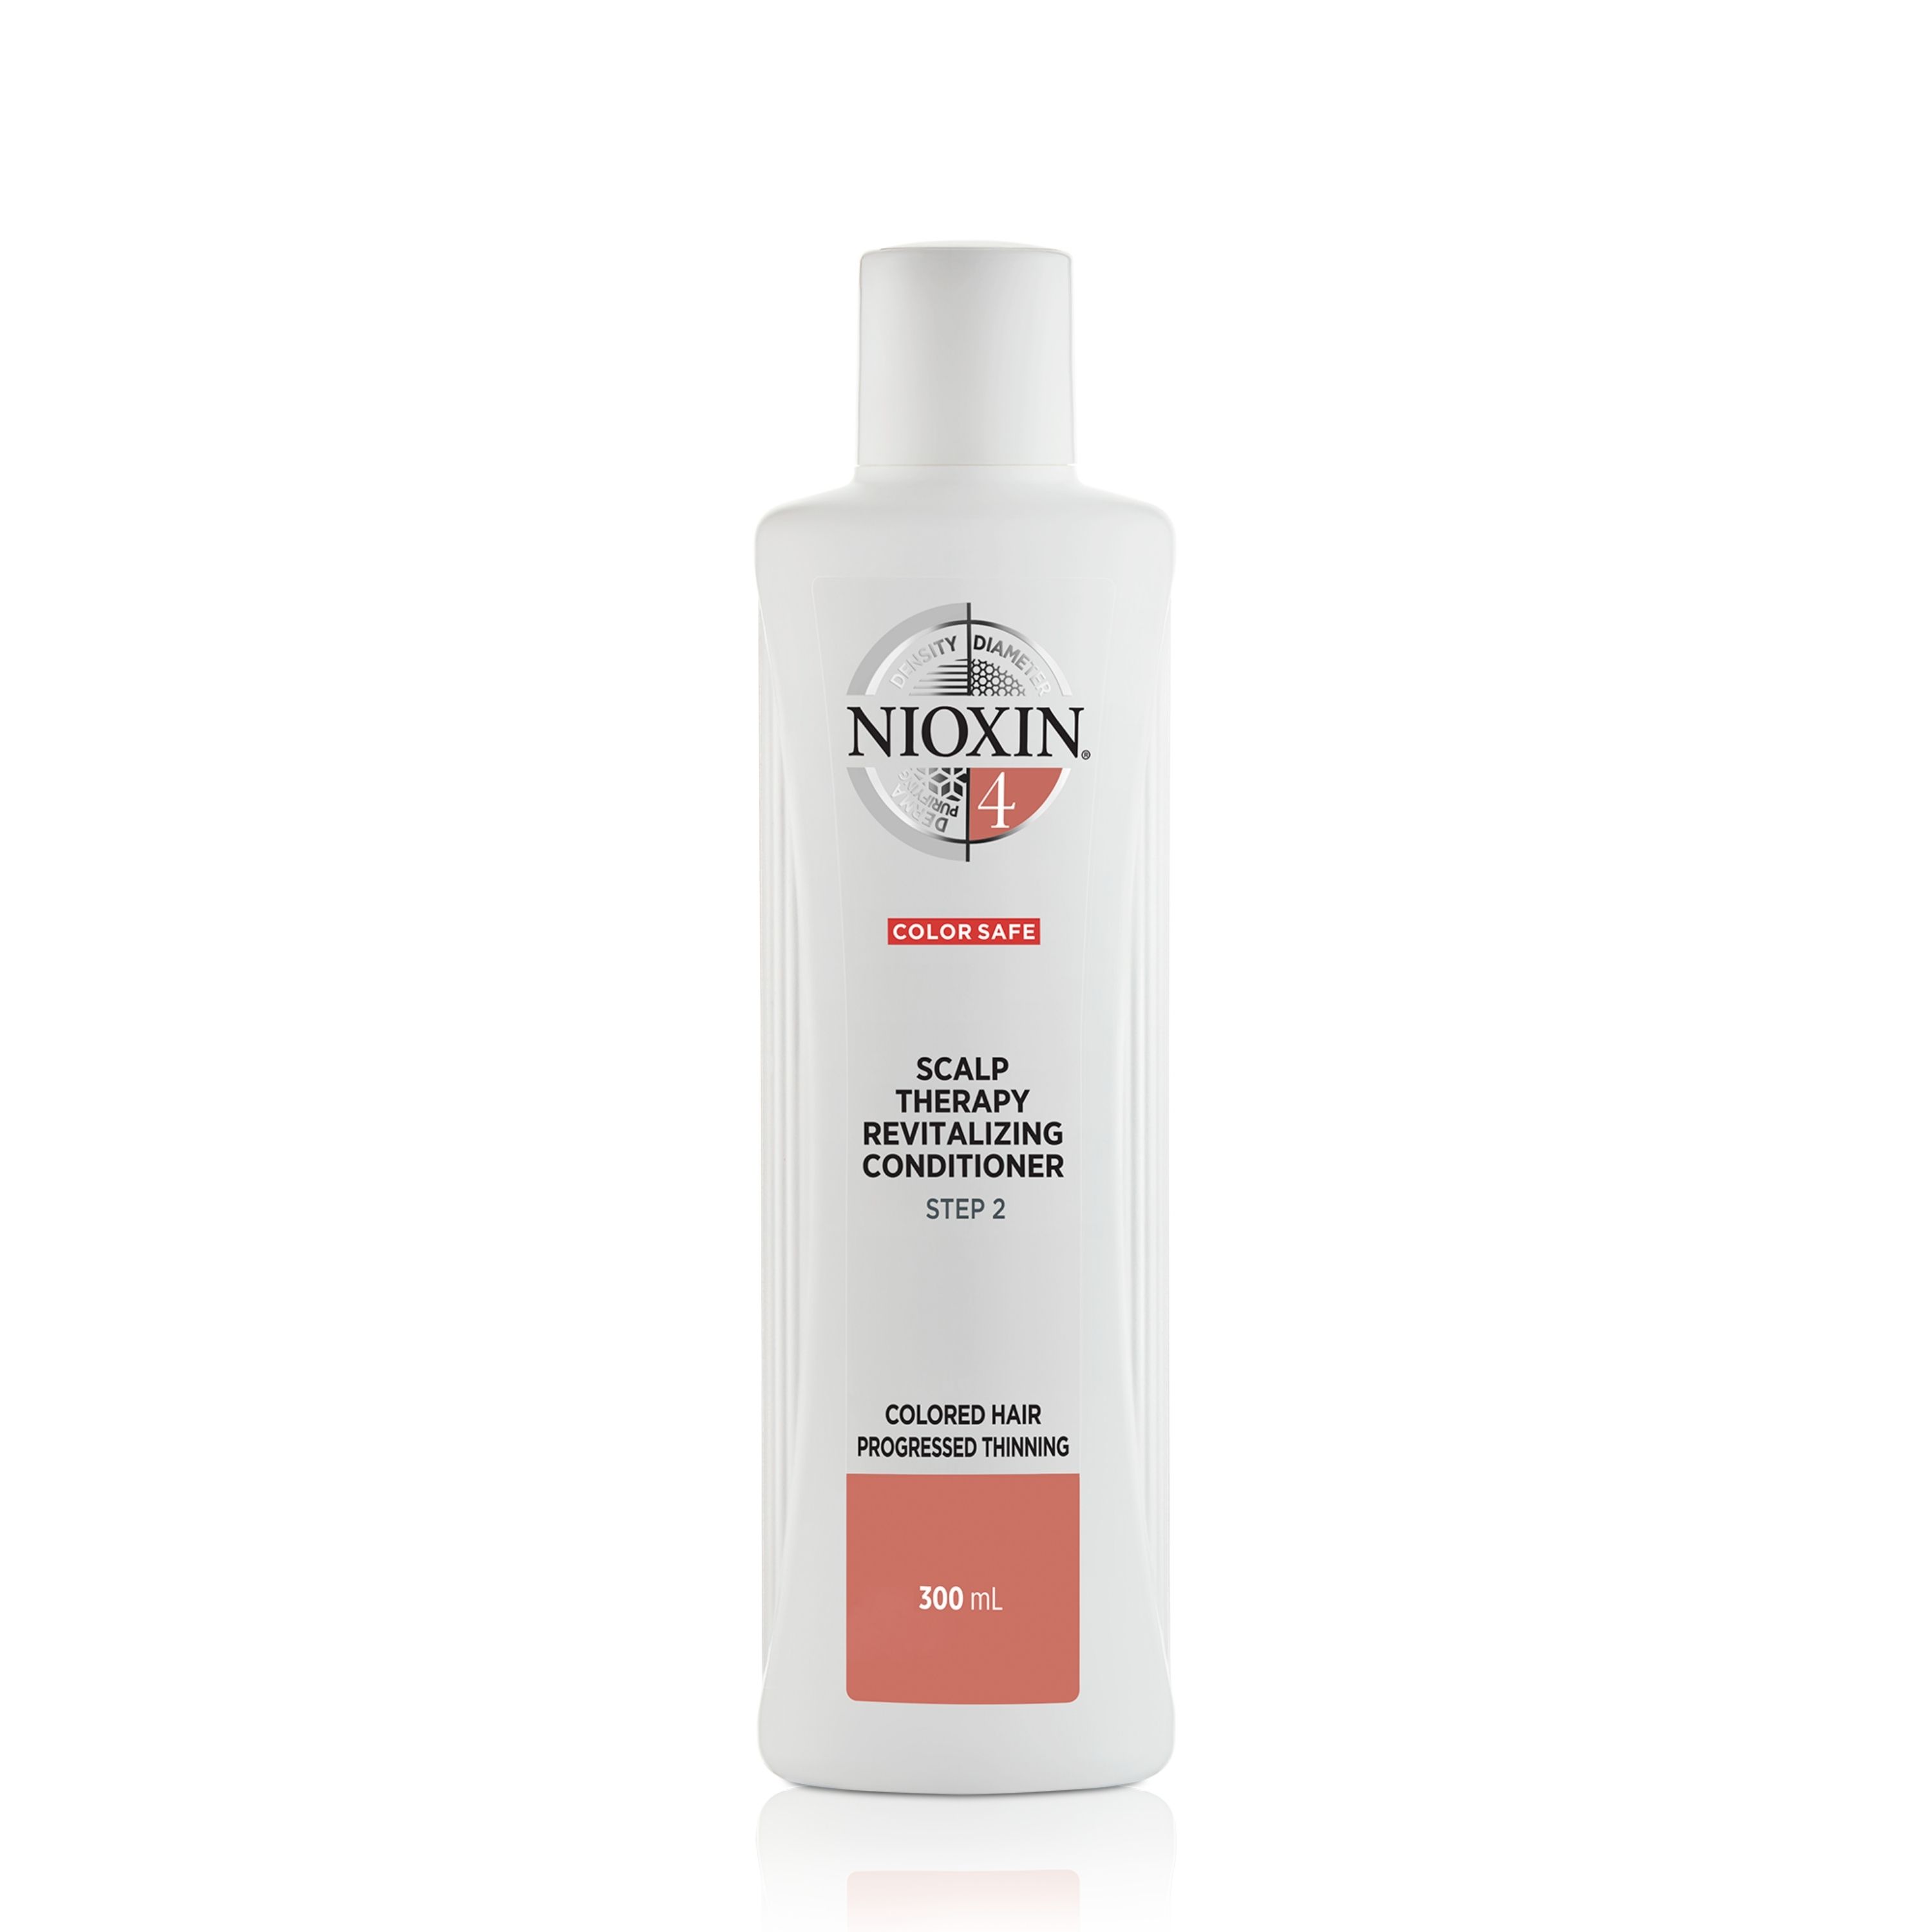 Image of Nioxin System 4 Conditioner 300ml